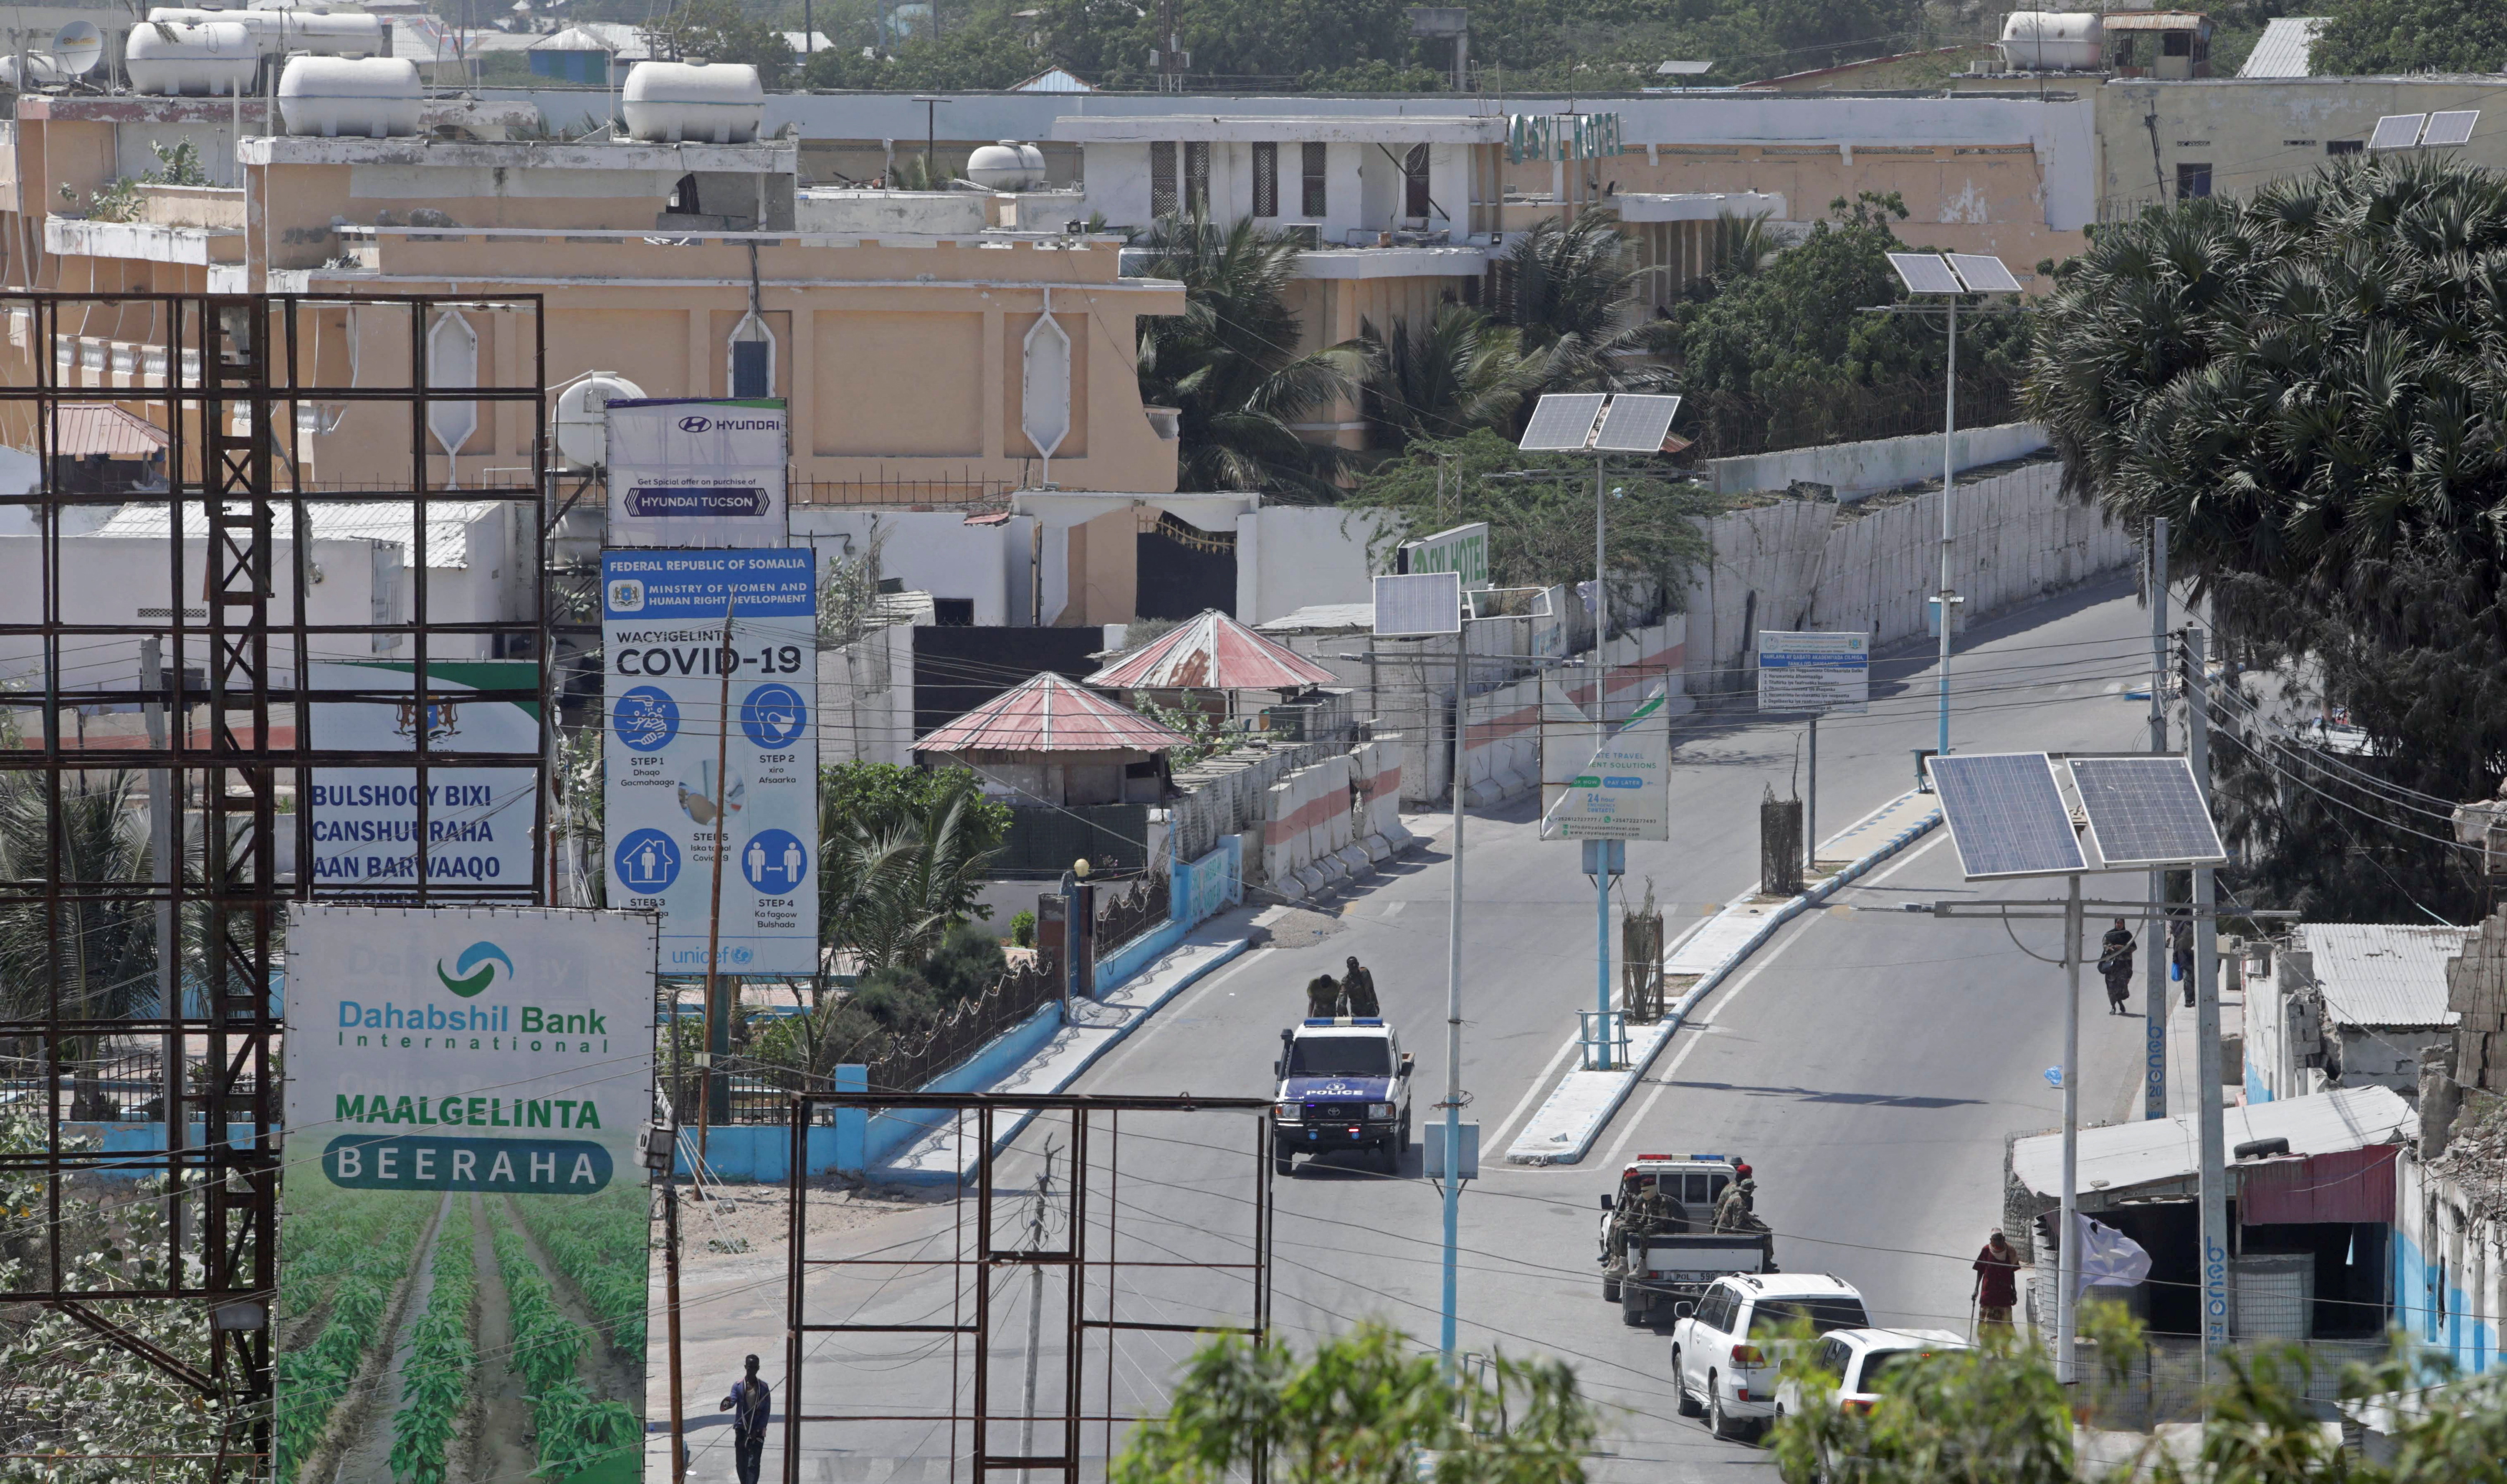 A Somali police truck drive along the empty street in front of the Presidential palace in Mogadishu